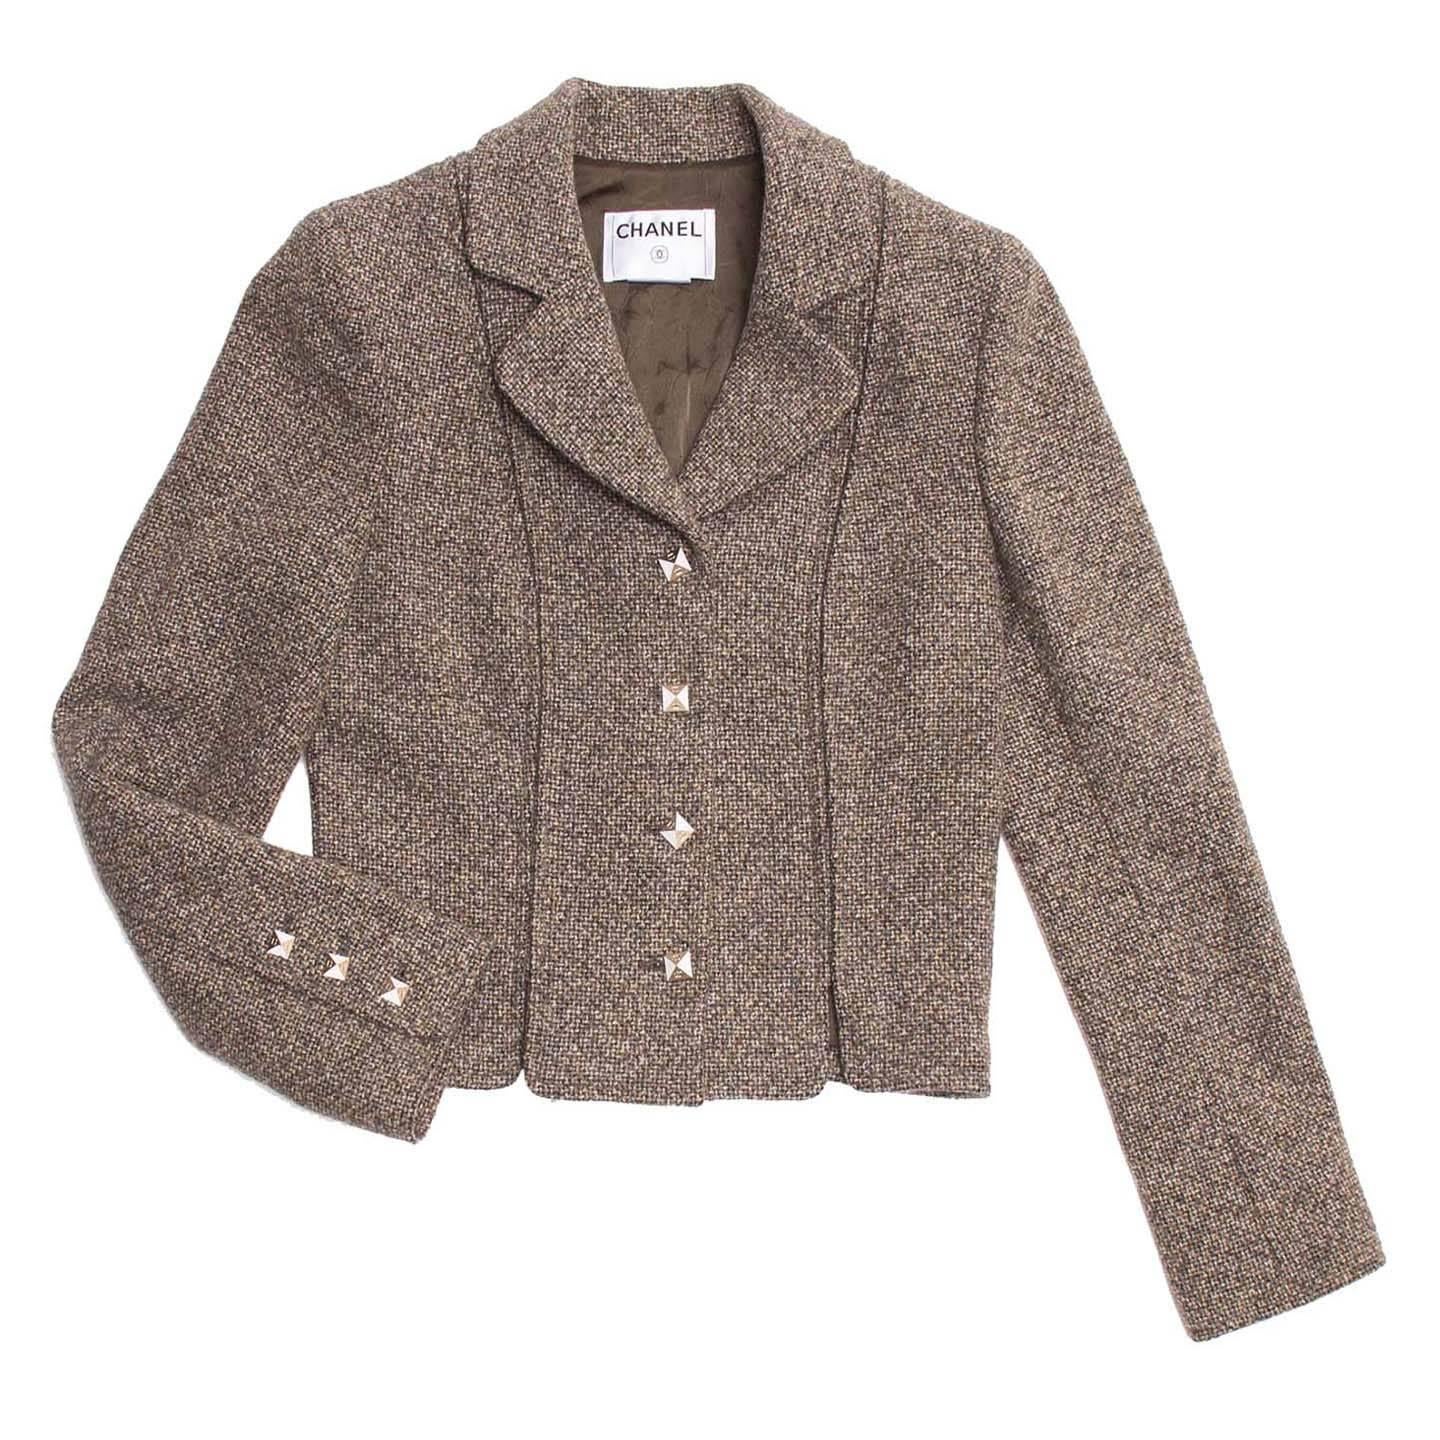 Classic Chanel wool tweed suit. The jacket is cropped and fitted with a very nice fake inverted pleat detail adorning front and back side seams and creating elegant little vents at hem. Matte brushed gold buttons enrich the single breasted closure